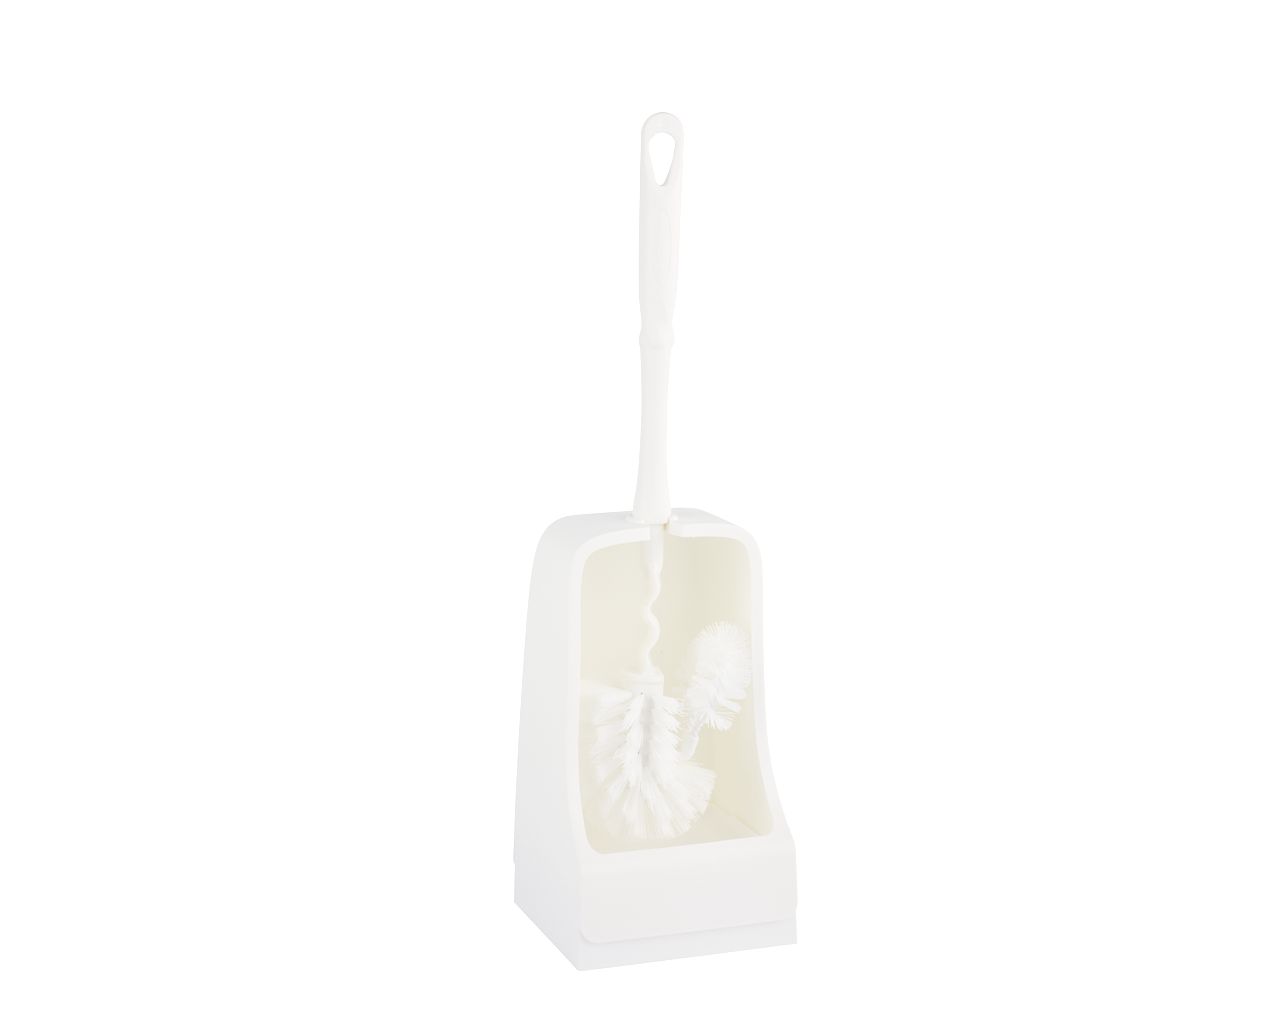 Loop-shaped toilet brush with holder, made of plastic (white)